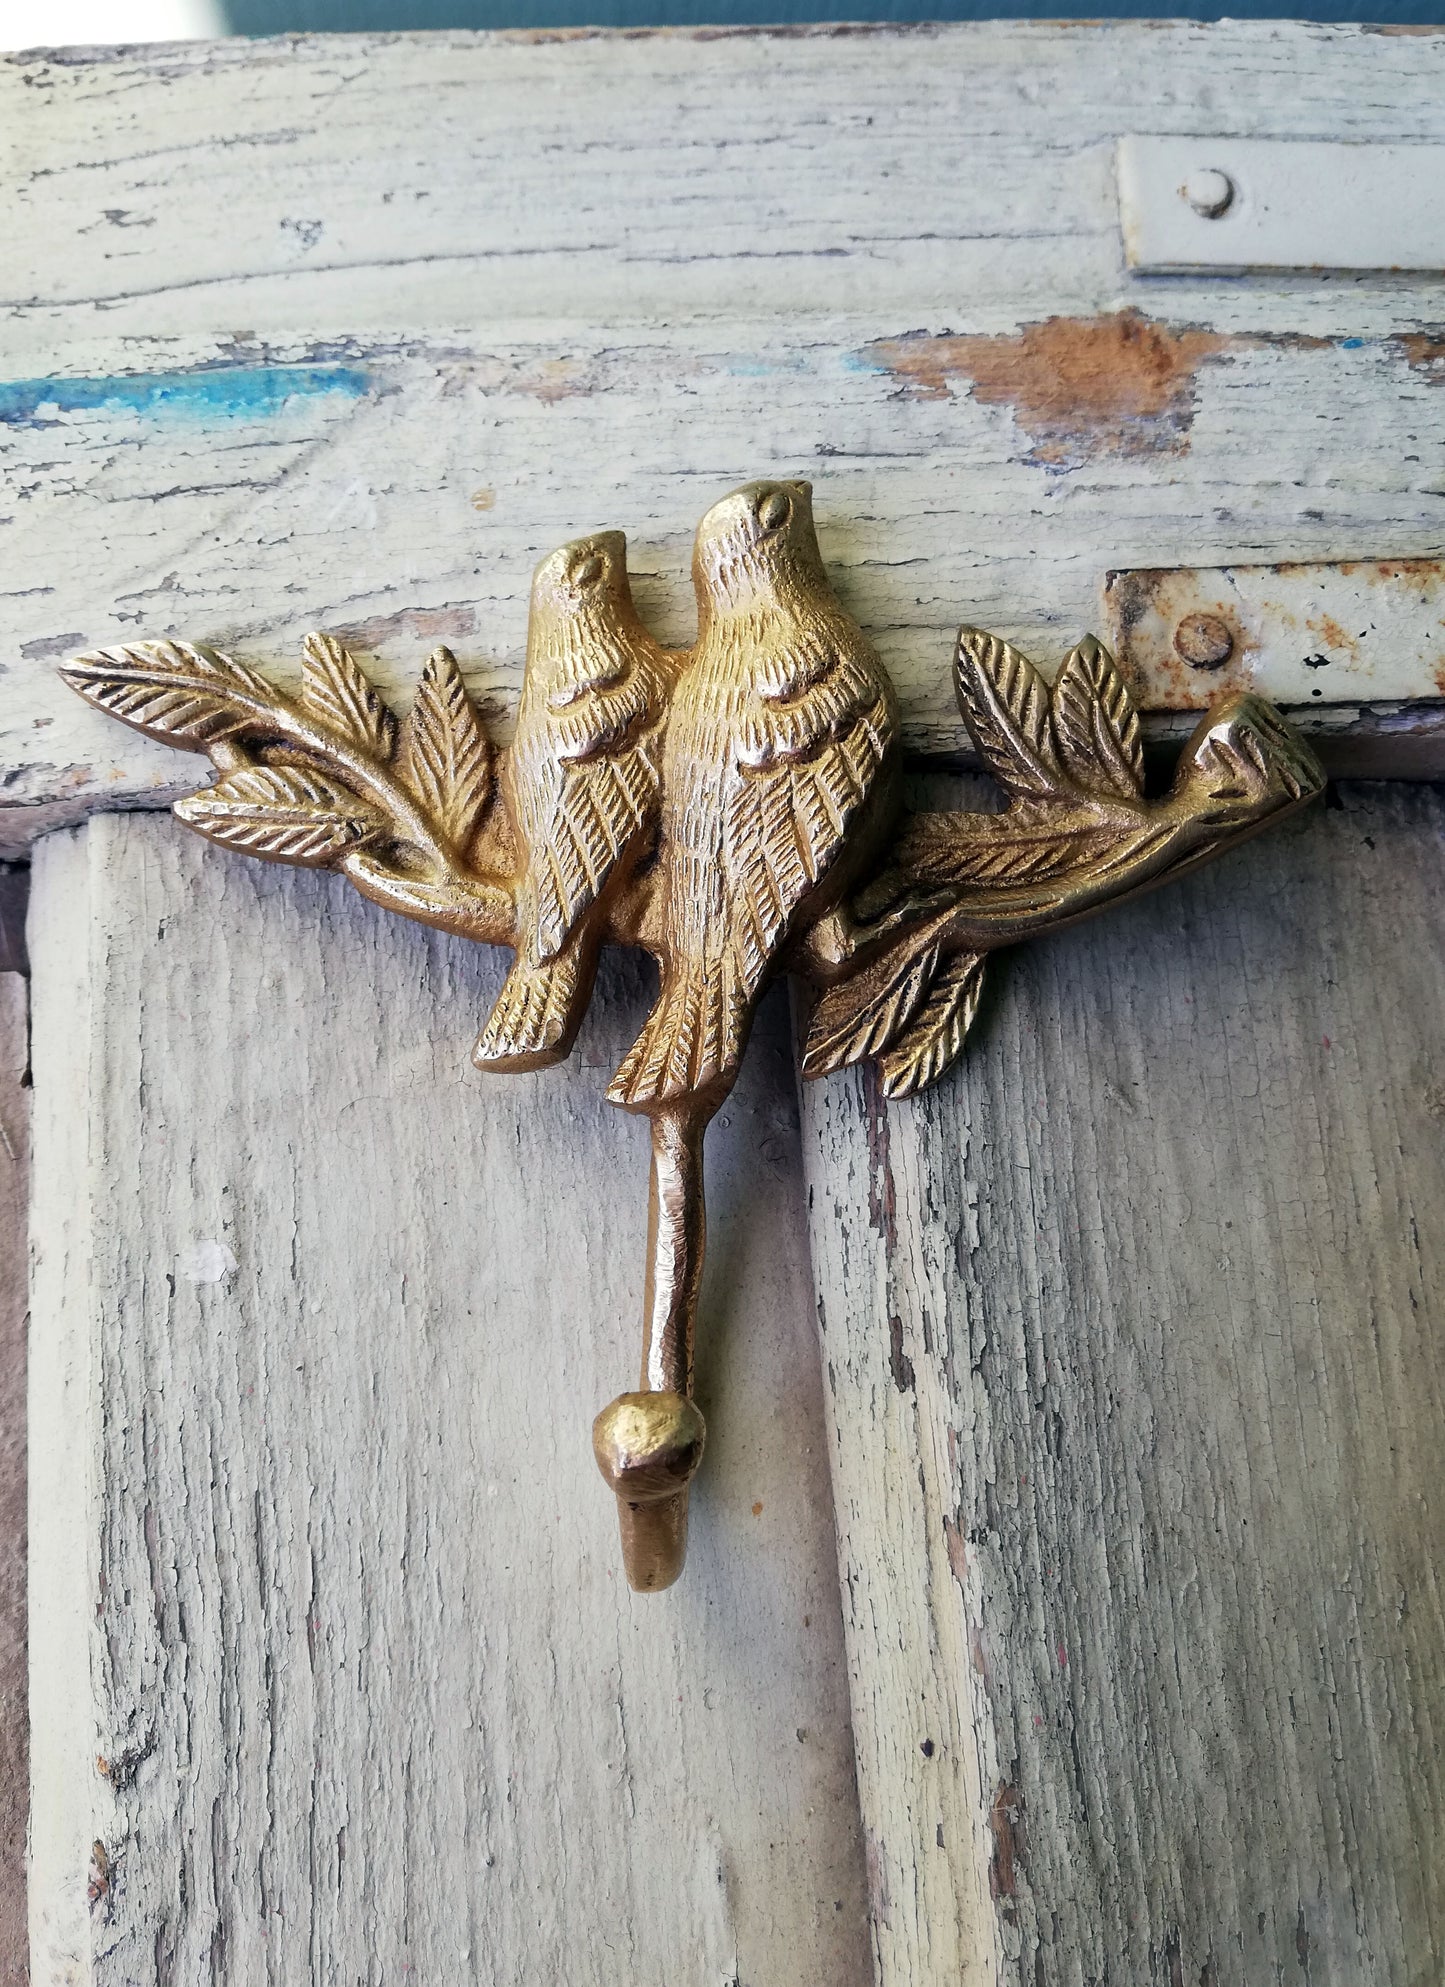 Handmade Vintage style Brass Wall Hook of two bird figurines sitting on a branch